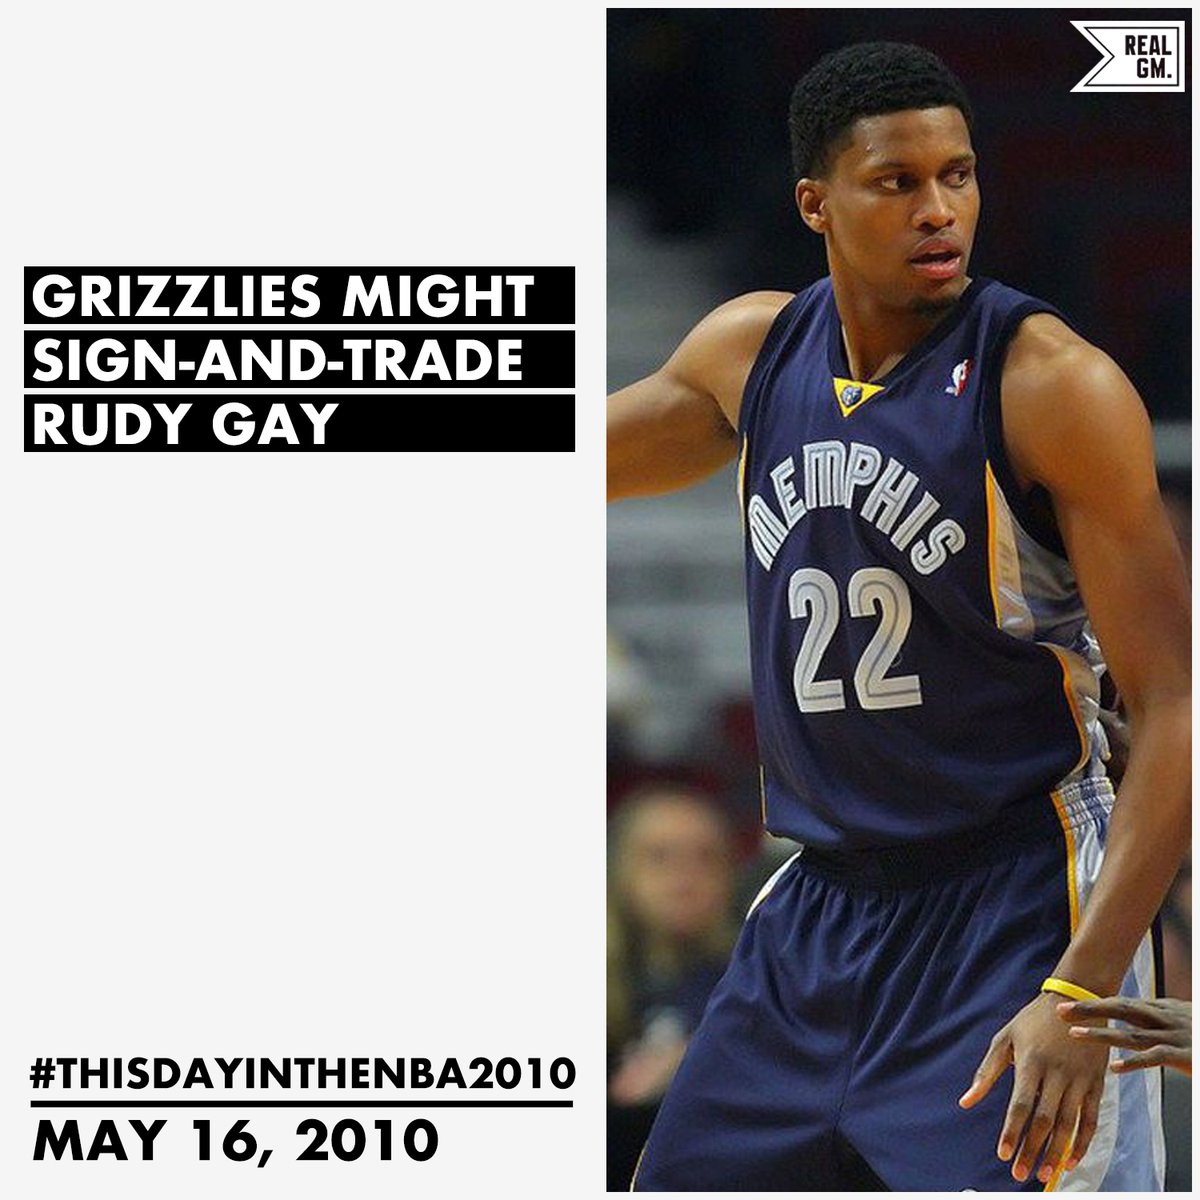  #ThisDayInTheNBA2010May 16, 2010Grizzlies Might Sign-And-Trade Rudy Gay https://basketball.realgm.com/wiretap/203934/Grizzlies-Might-Sign-And-Trade-Rudy-Gay